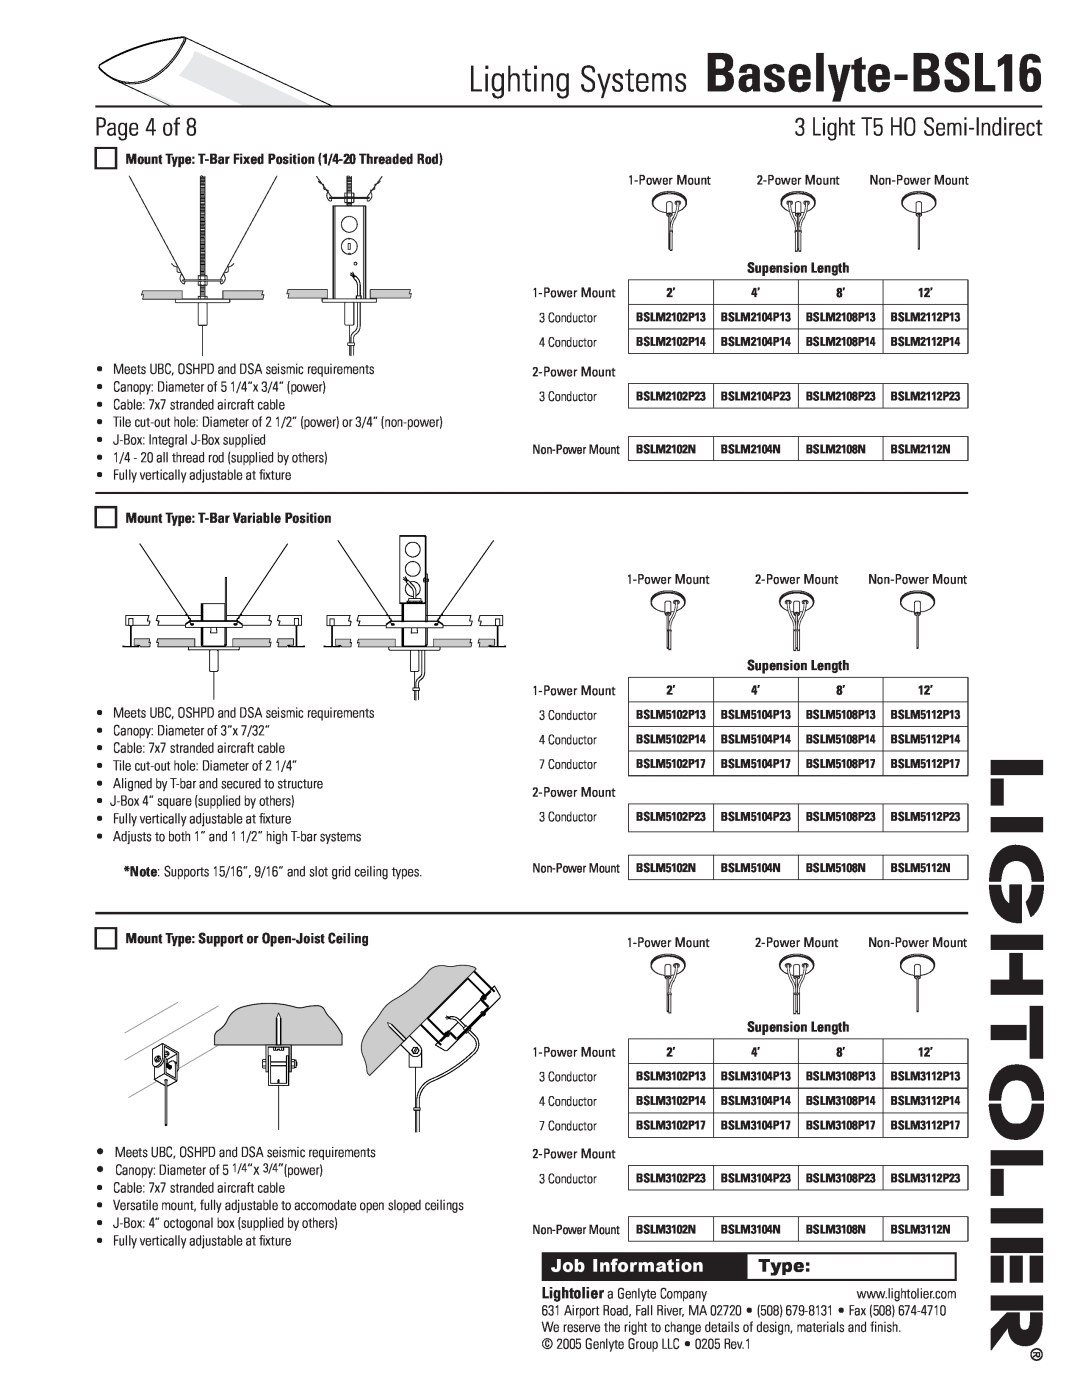 Lightolier Lighting Systems Baselyte-BSL16, Page of, Mount Type T-BarVariable Position, Light T5 HO Semi-Indirect 